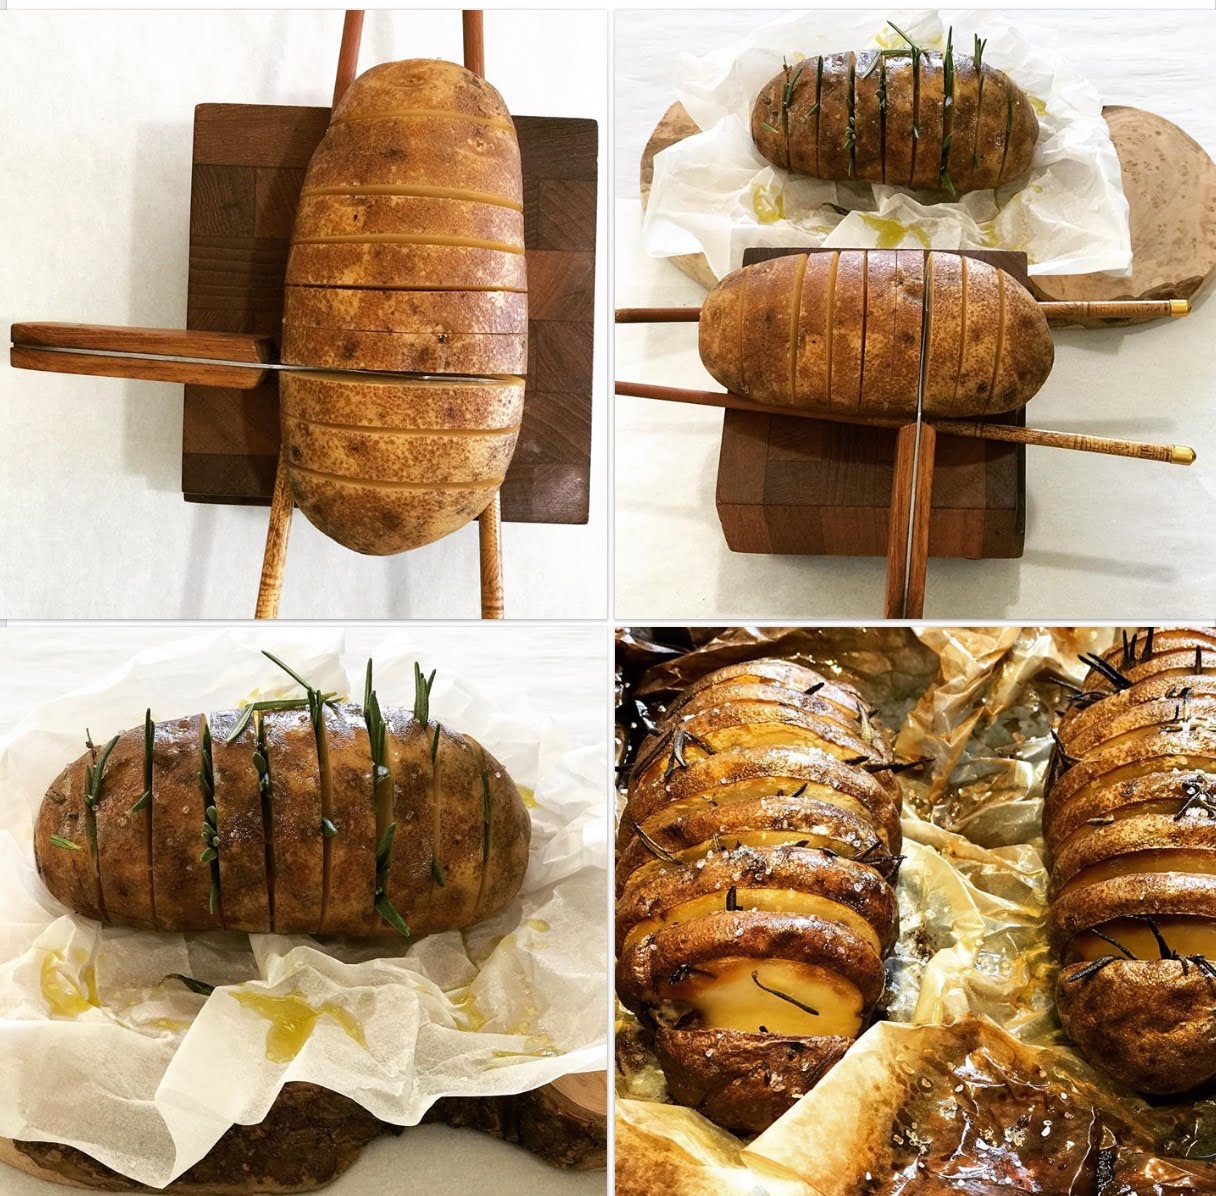 How to cut Hasselback potatoes